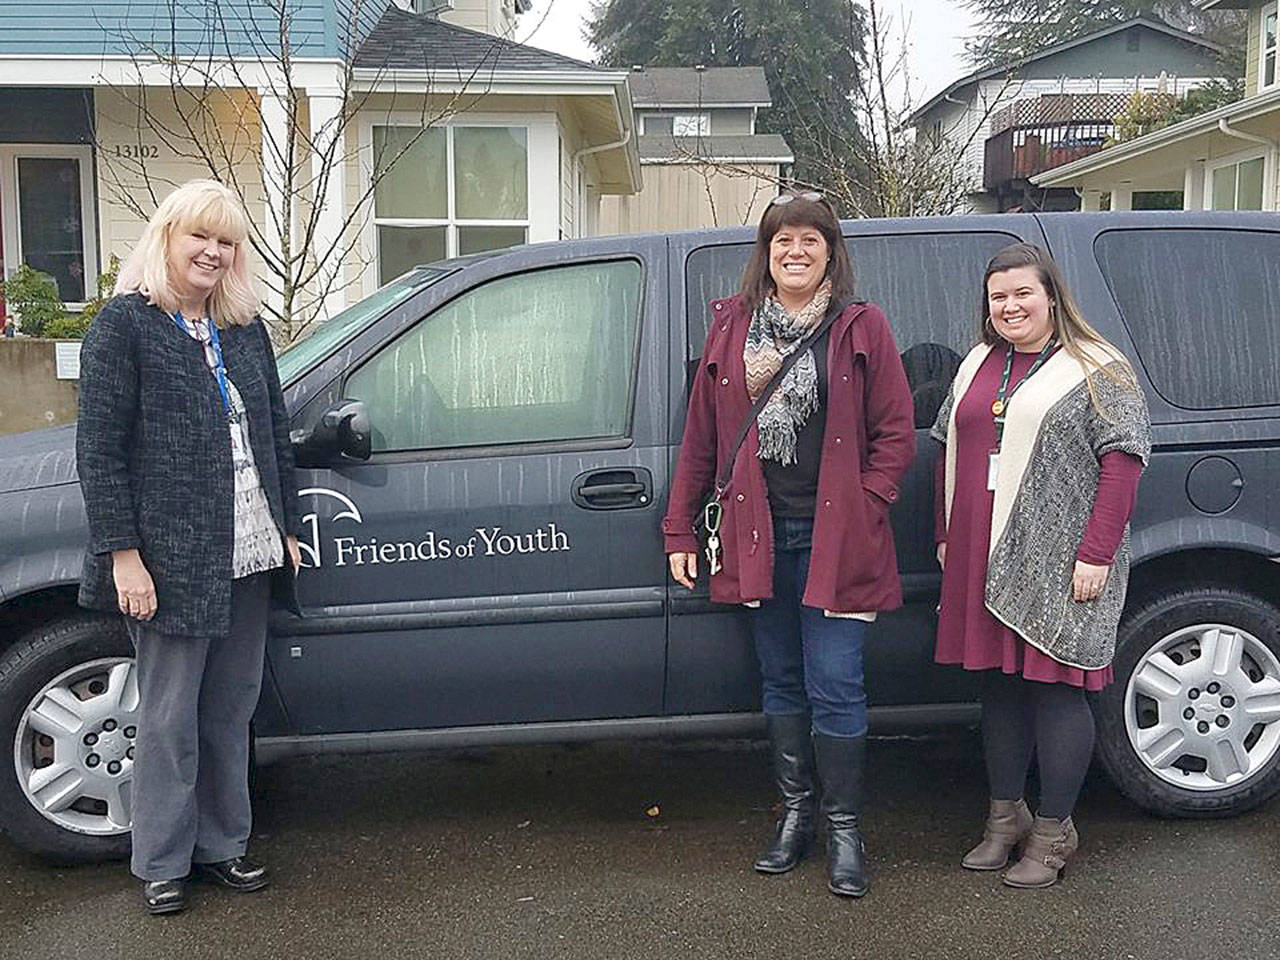 (L-R) Friends of Youth President and CEO Terry Potter and Senior Director of Homeless Youth Services Karina Wiggins receive van from Councilmember Balducci. Courtesy of King County.